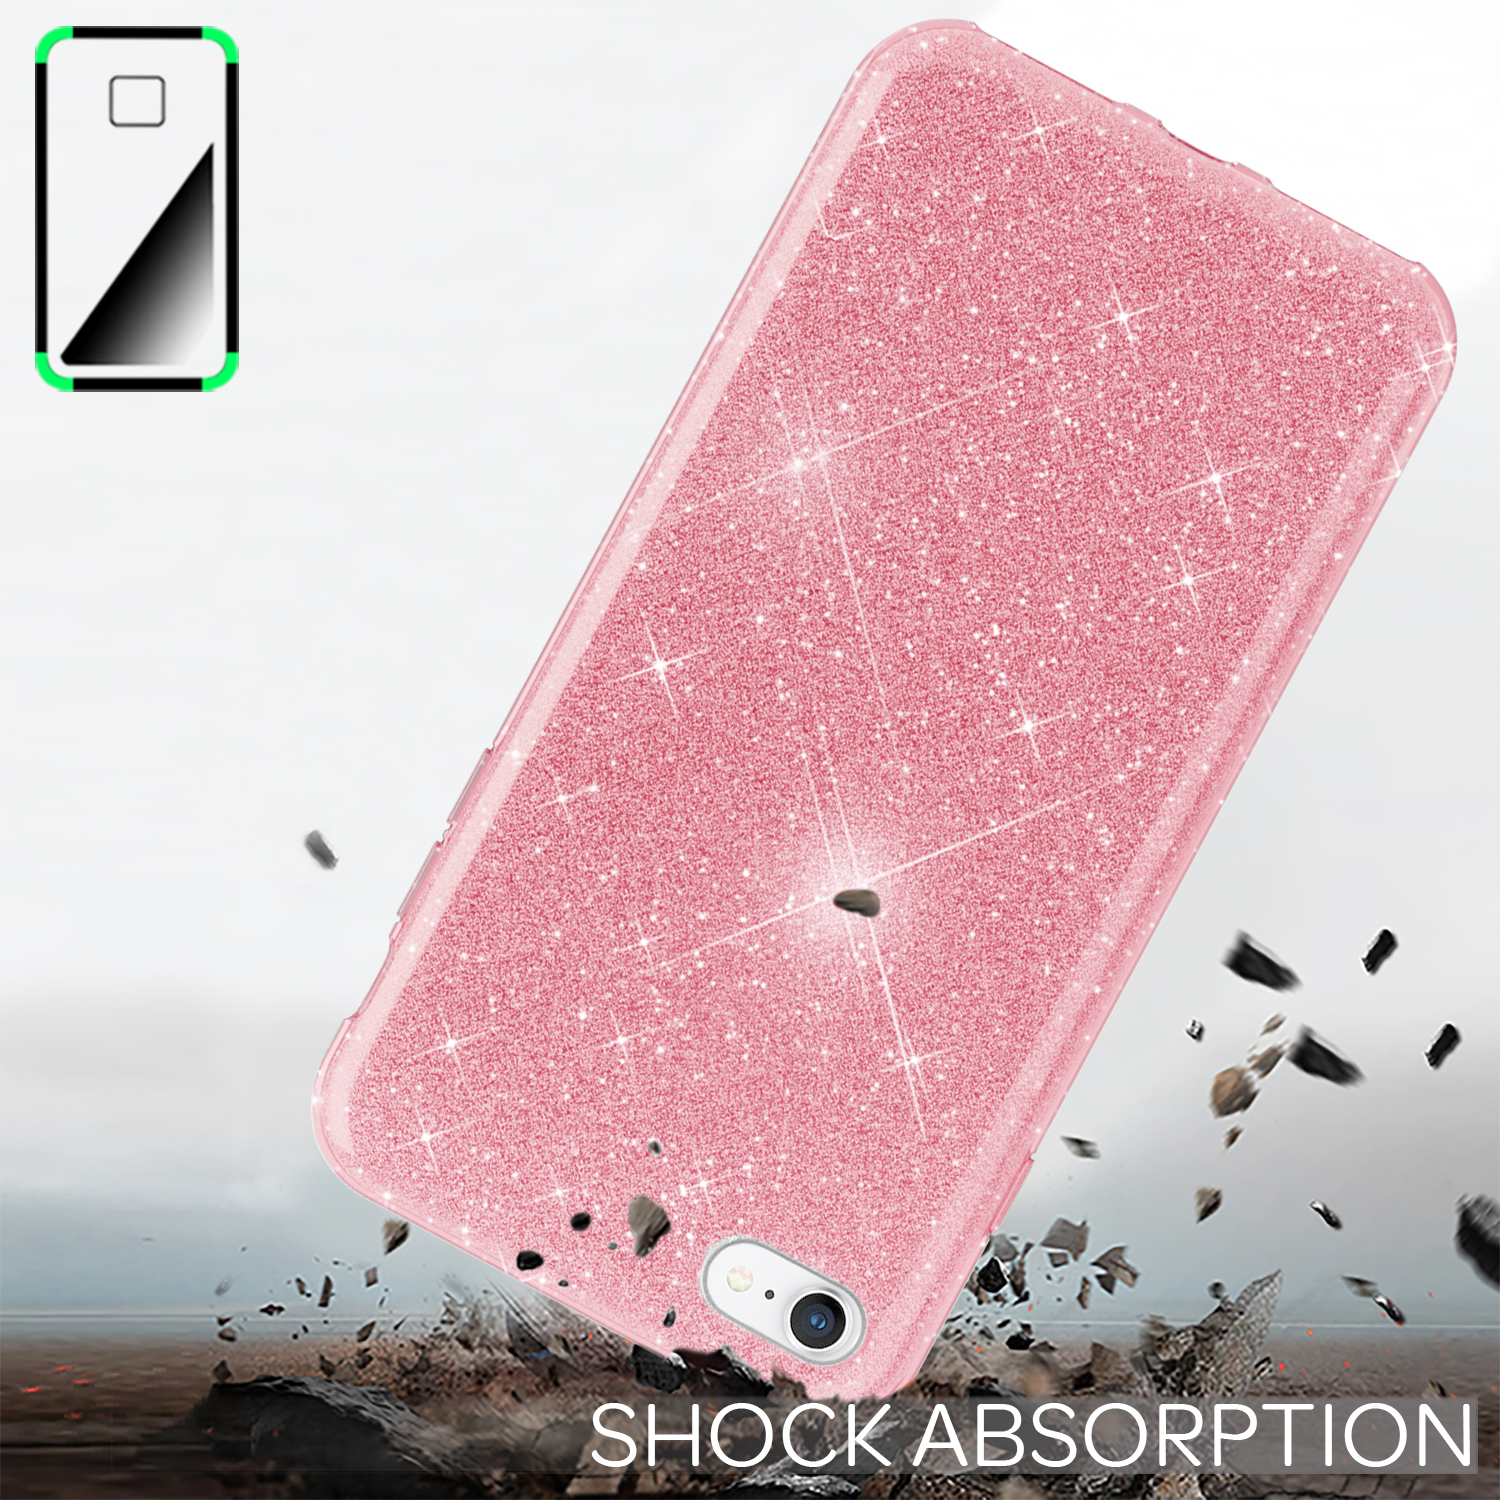 NALIA Glitzer Hülle, 7 Pink iPhone (2020), Apple, SE iPhone iPhone Backcover, 8